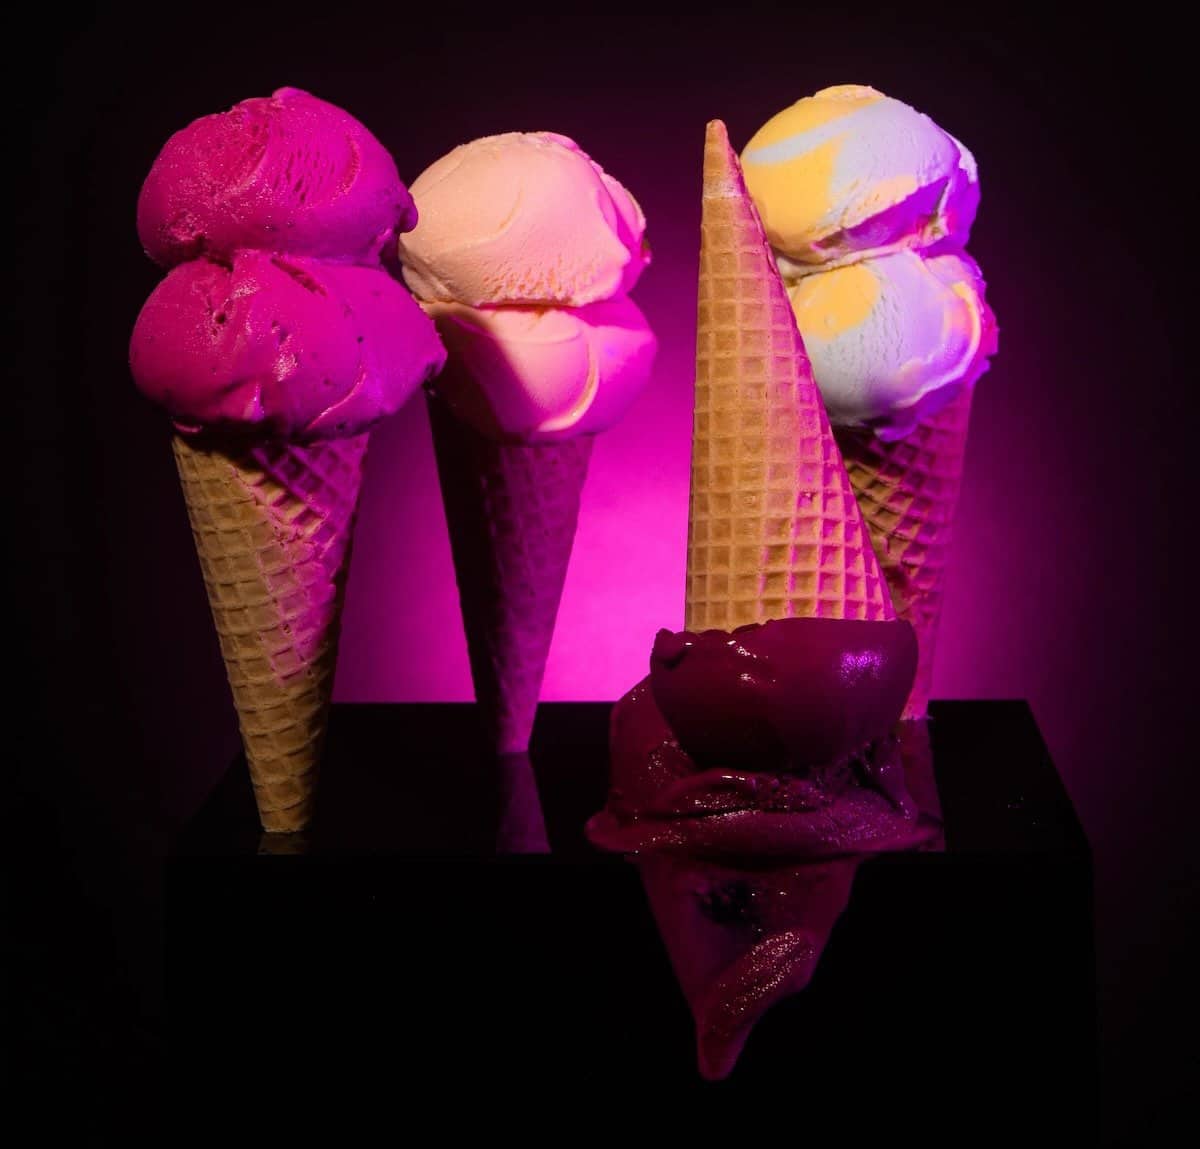 ice cream cones with black background and pink lighting